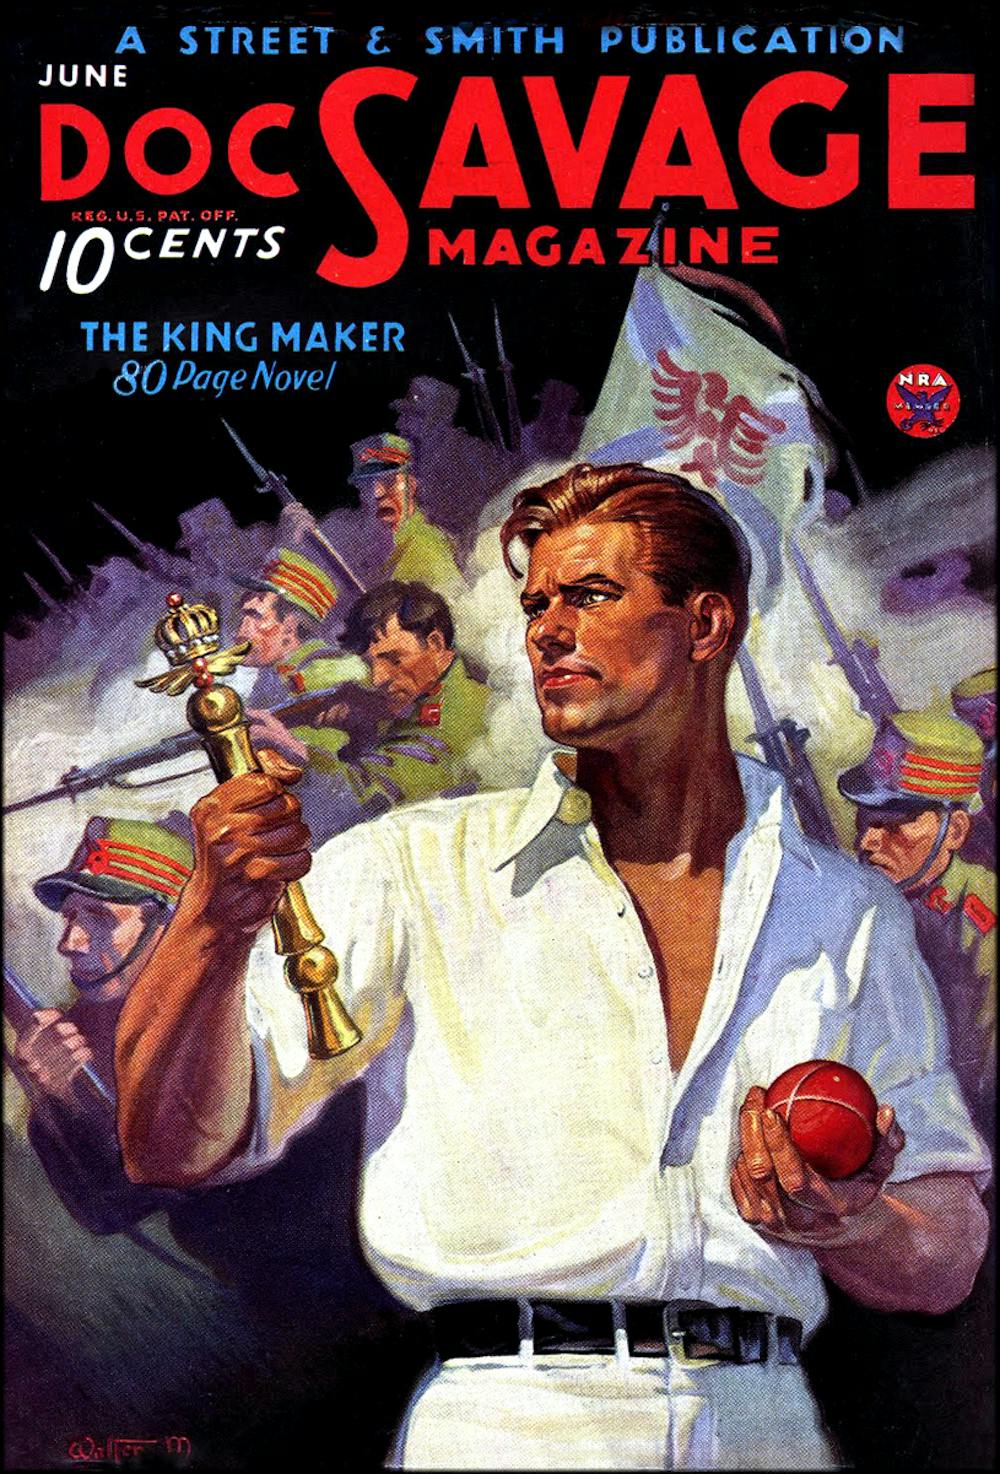 Meet Doc Savage, the most famous superhero you've never heard of